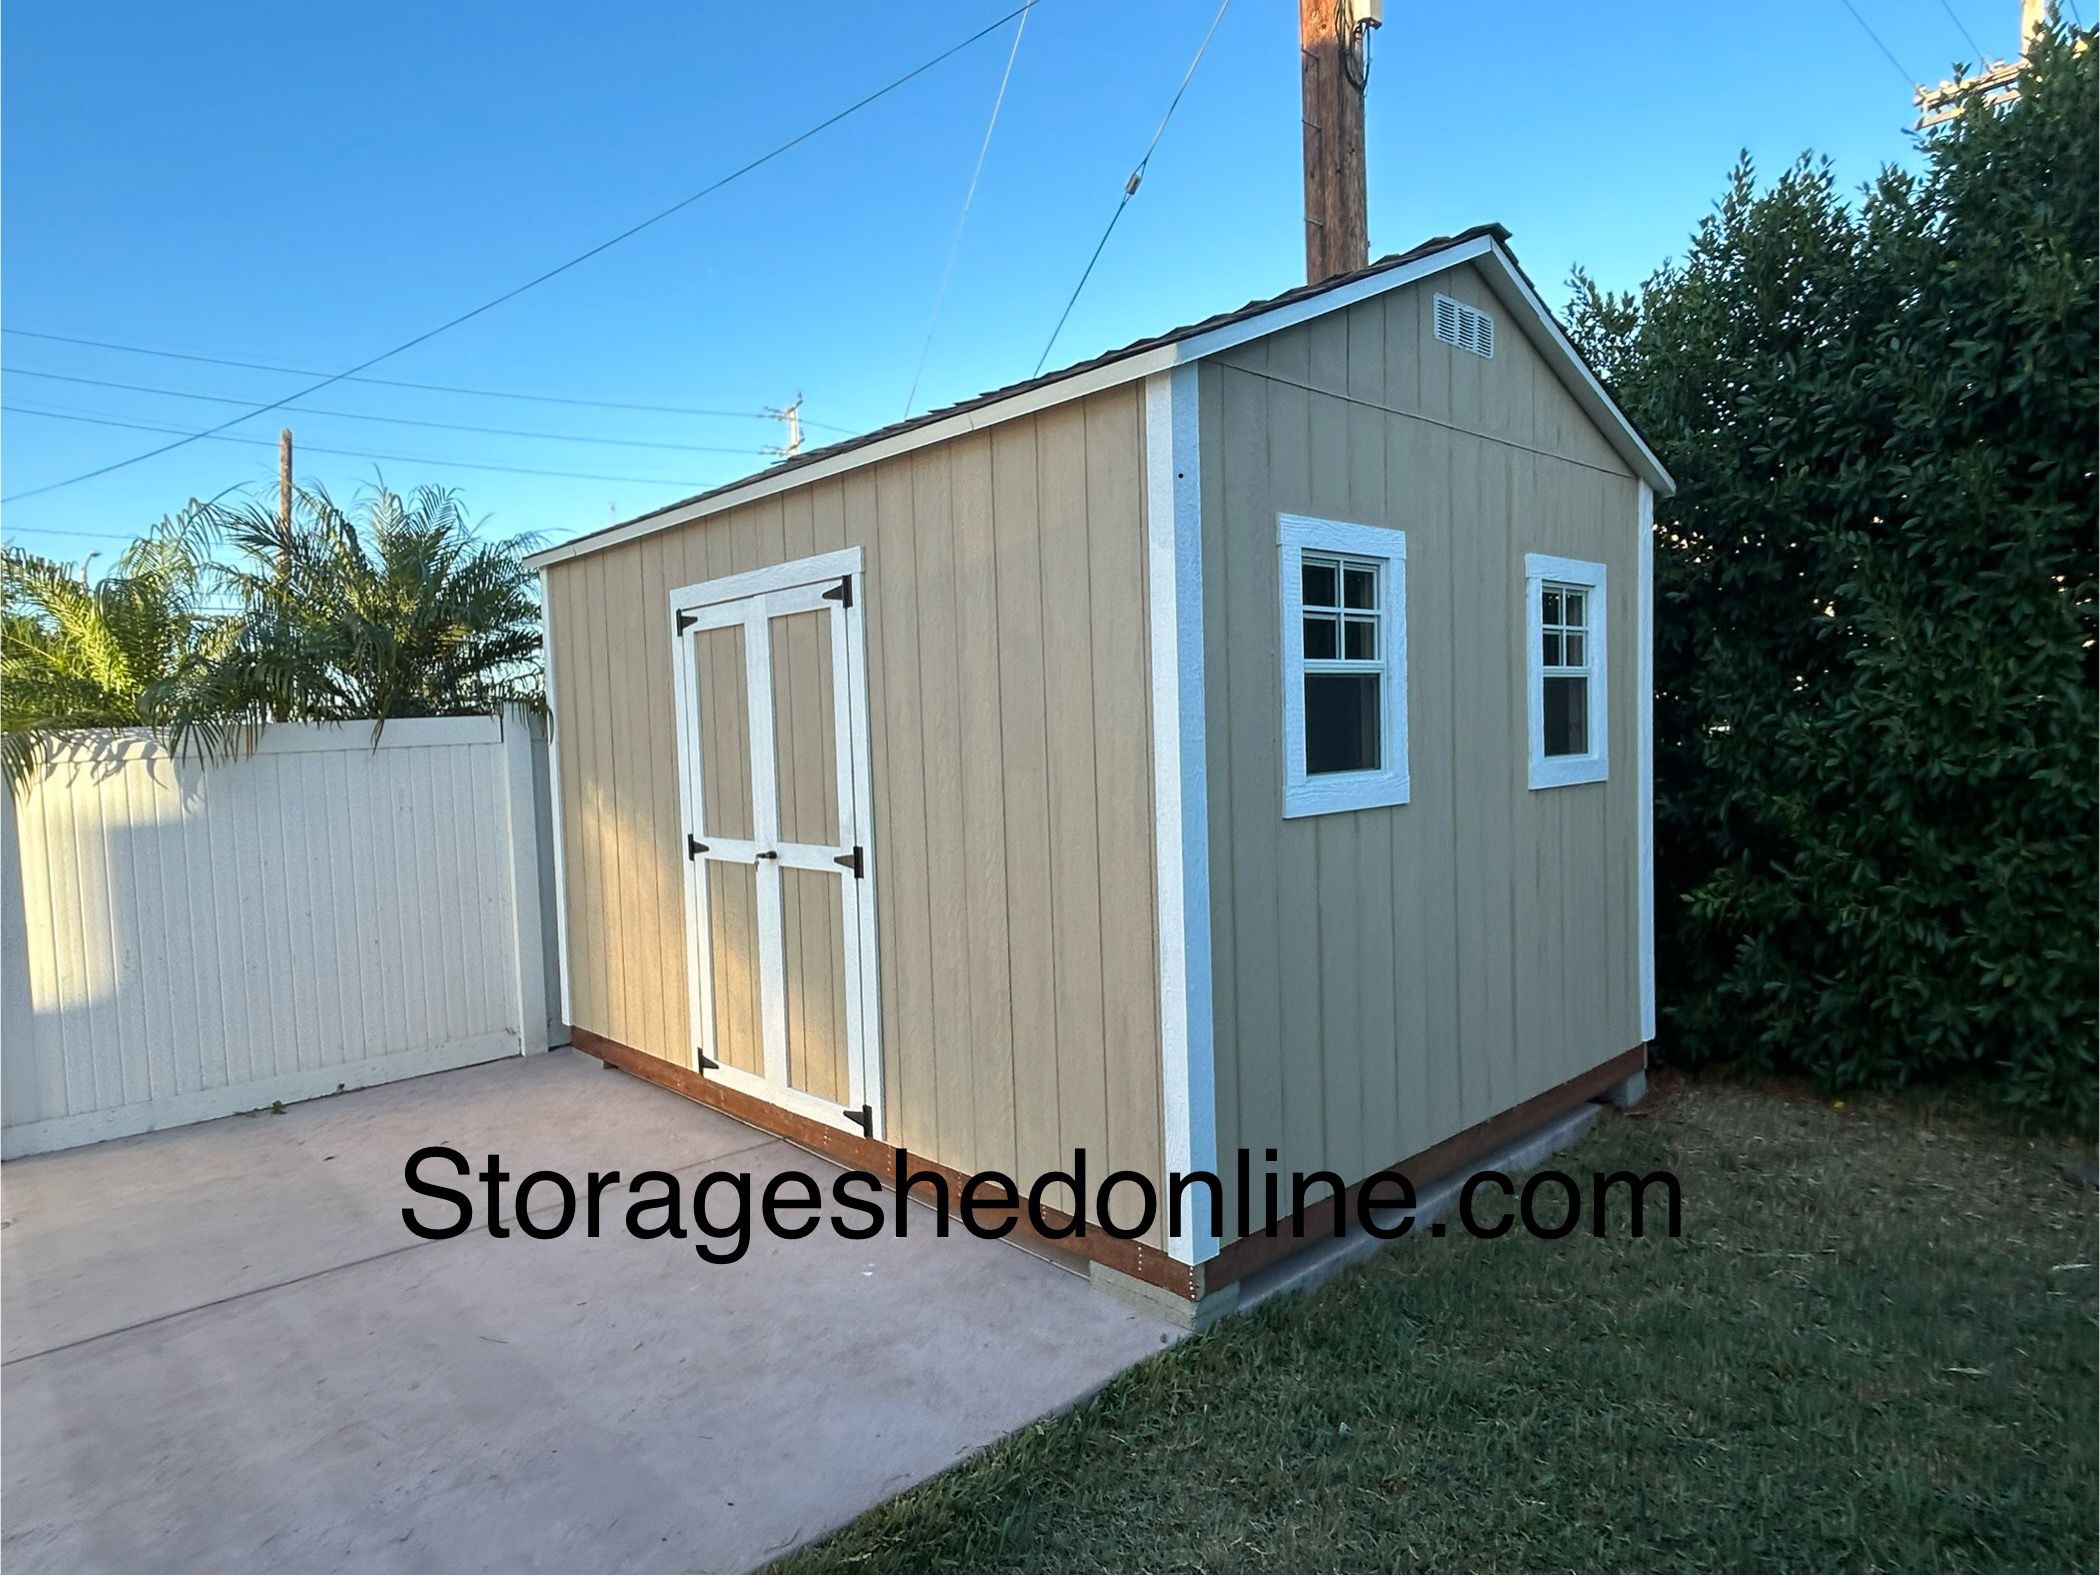 Storage Sheds Built On Site Any Size